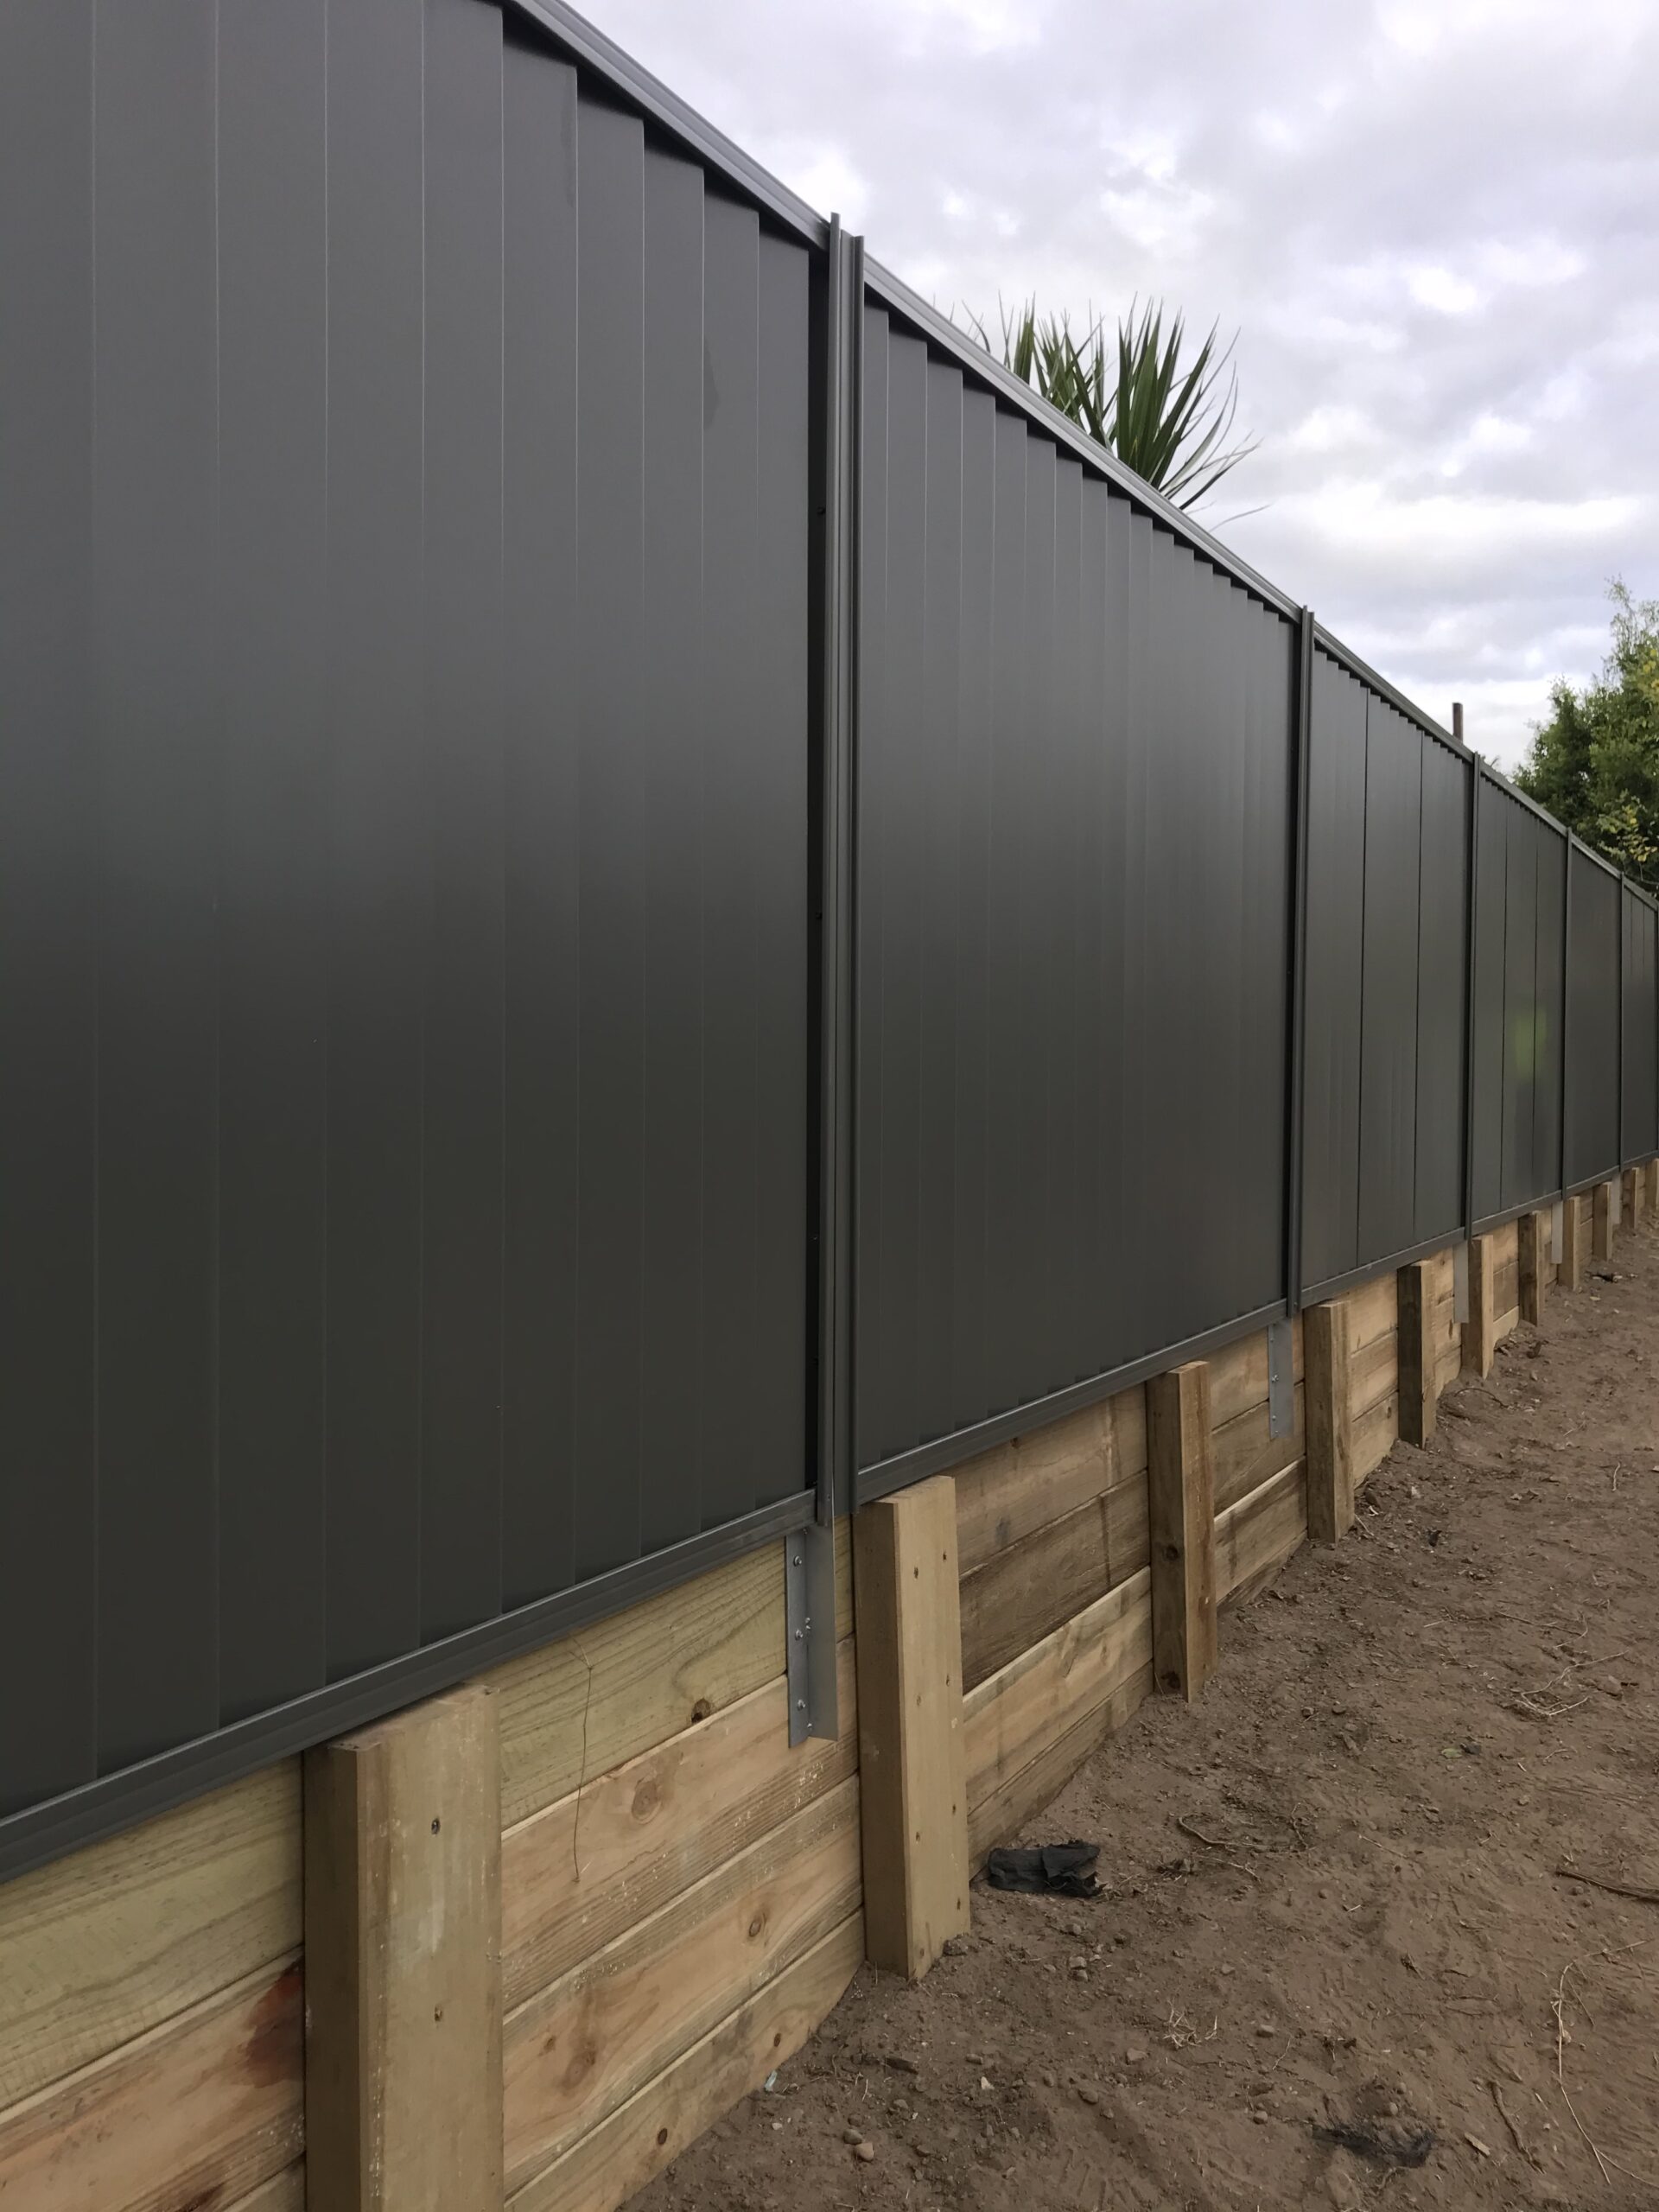 retaining-wall-colorbond-fence-builder-flinders-view-ipswich